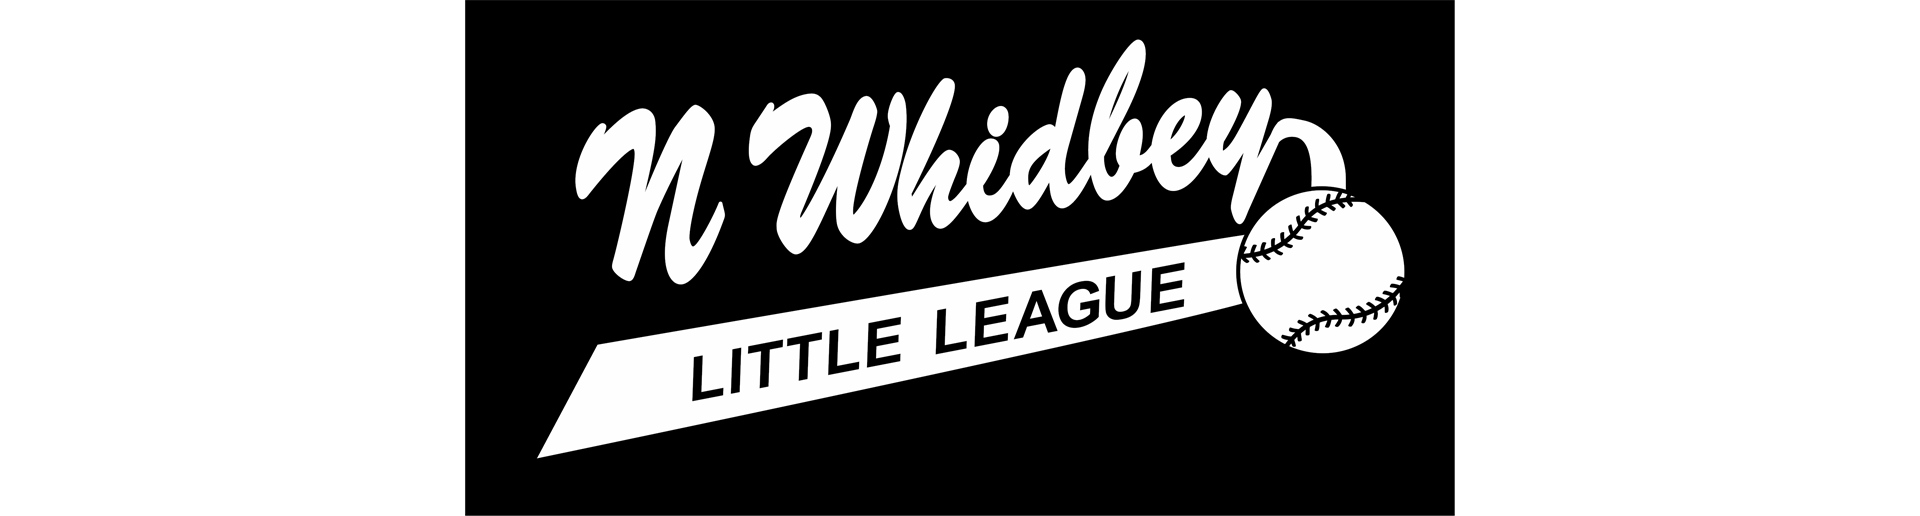 North Whidbey Little League Merch! 